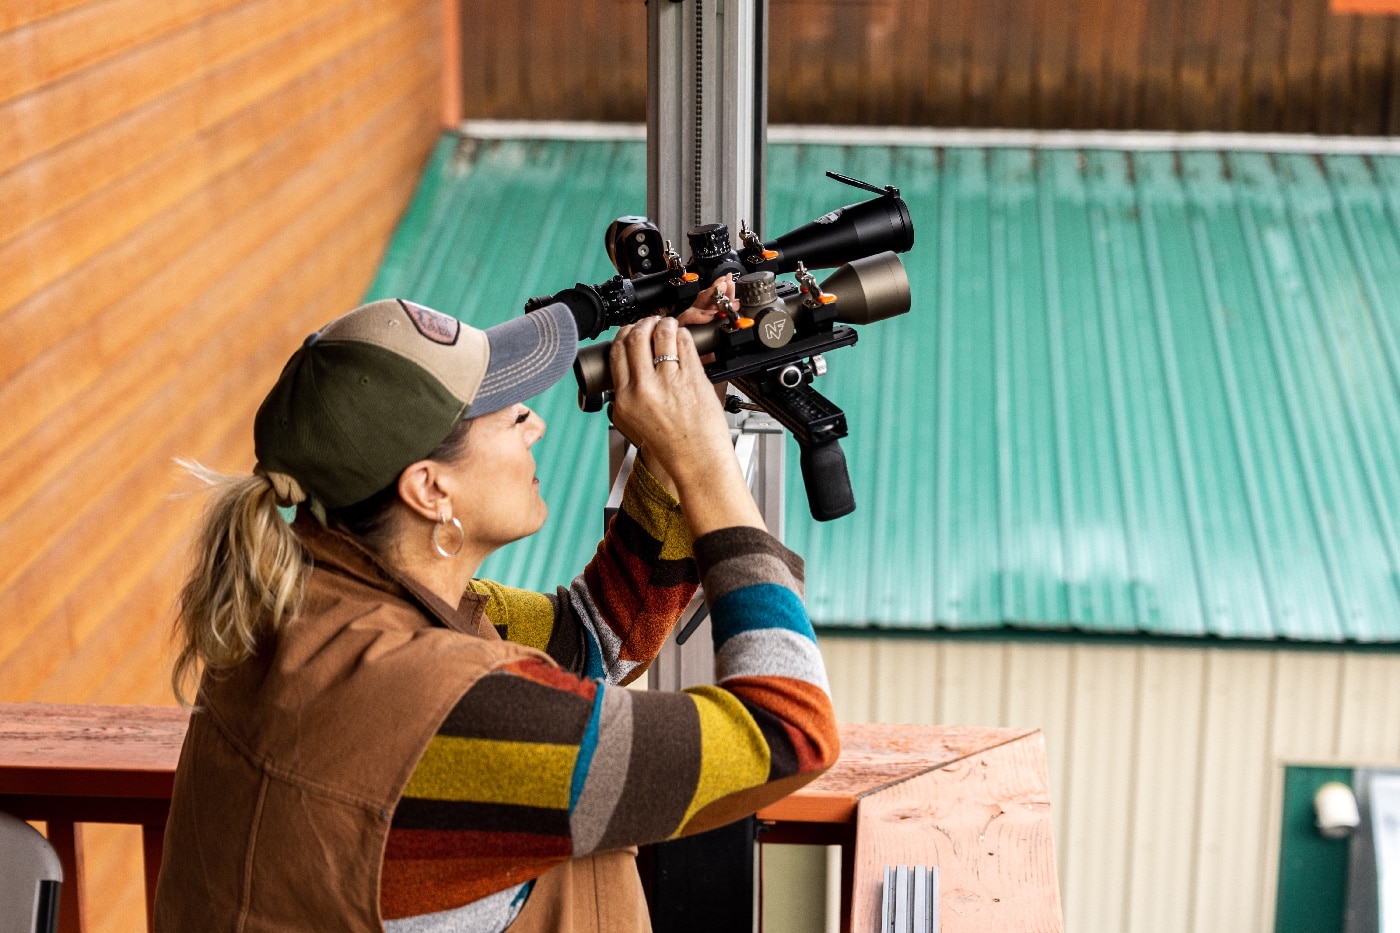 In this photograph, a woman employed by Nightforce Optics performs testing on the scopes. She is wearing a hat and is outside on a second story balcony. A green metal roof is visible in the background.